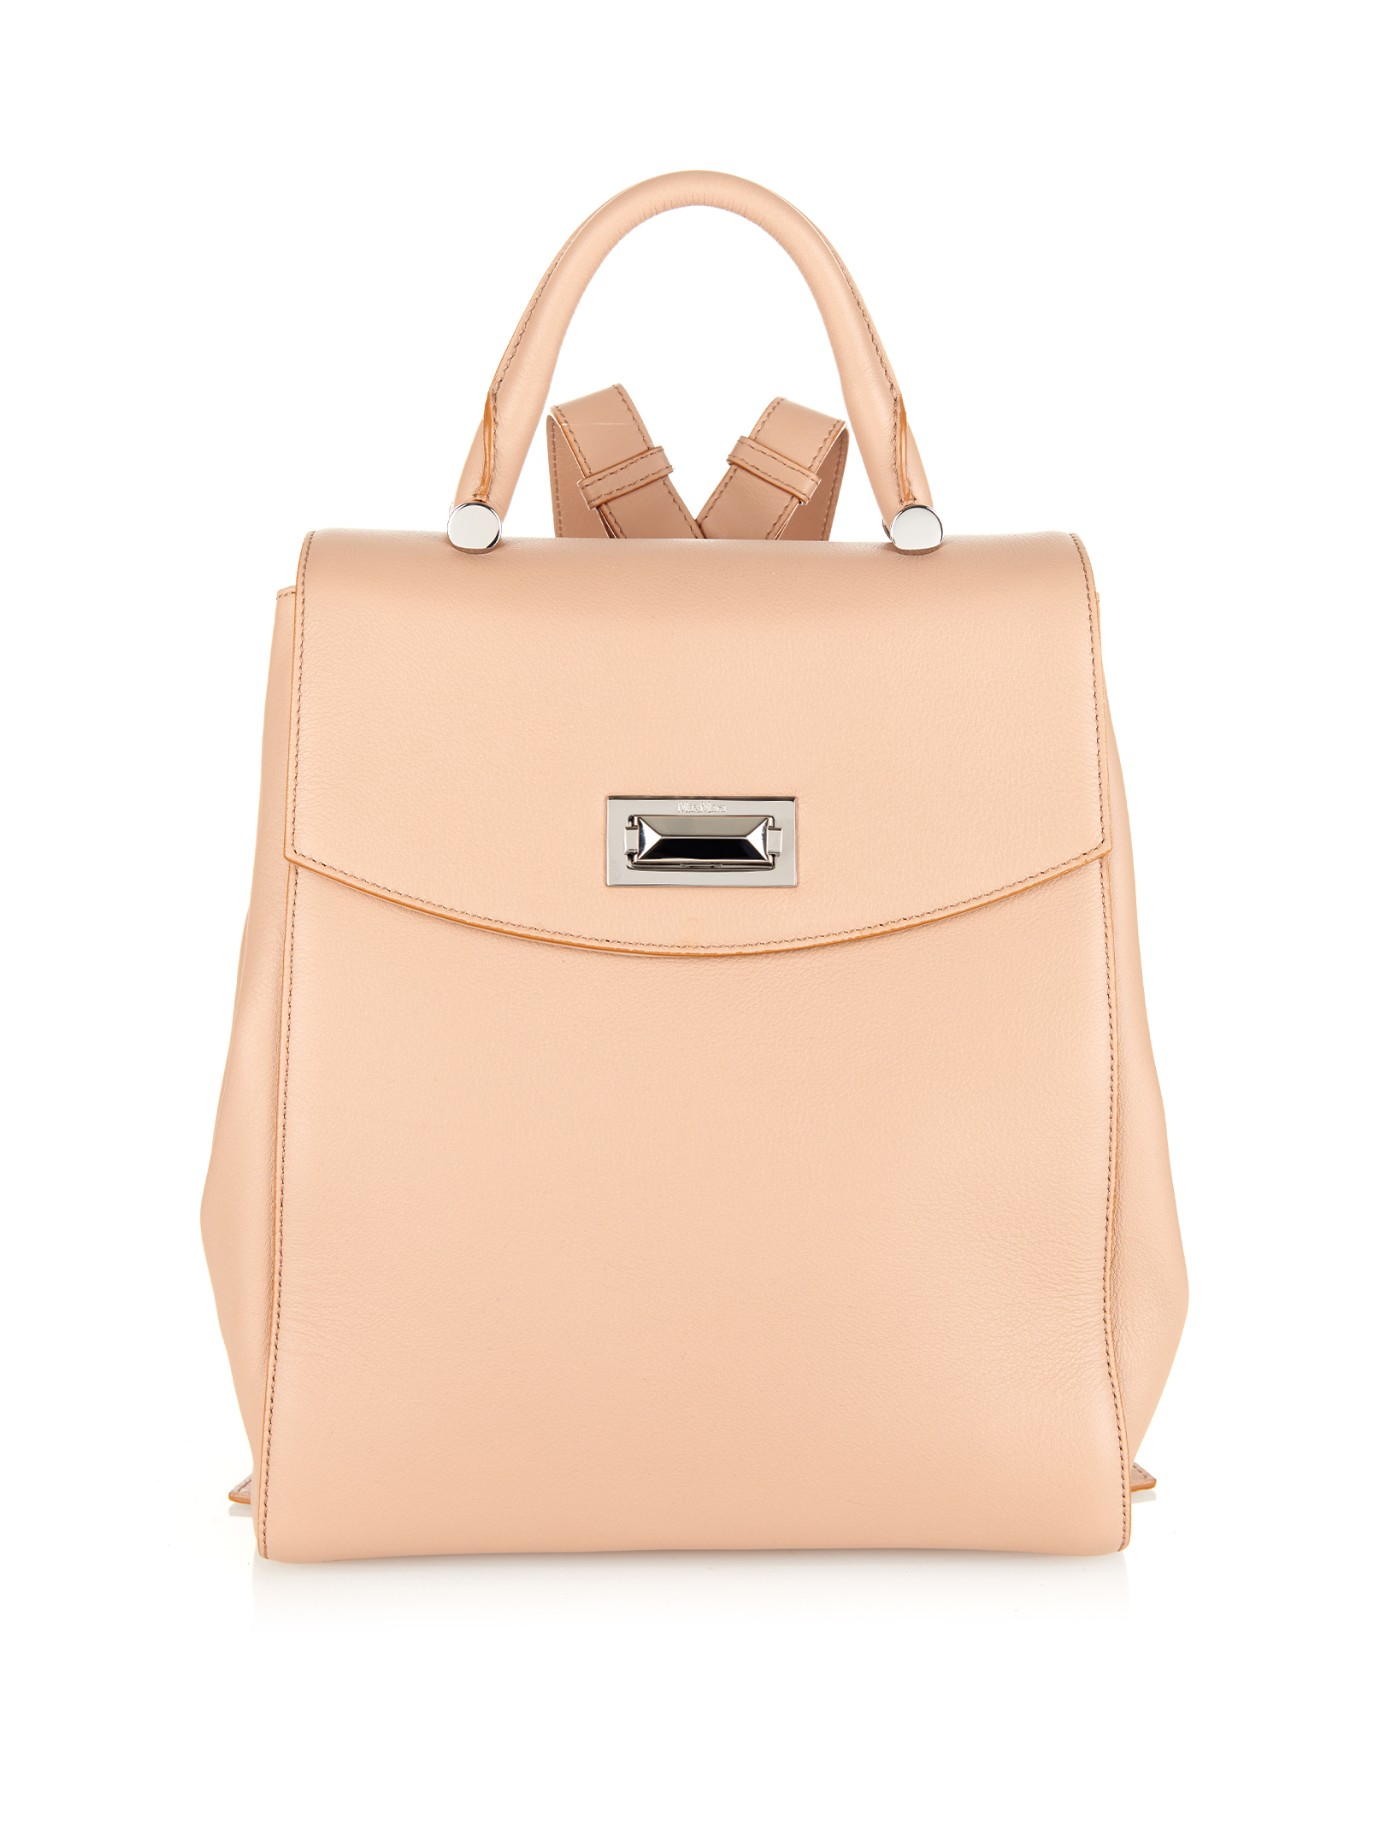 Max Mara New Hollywood Backpack in Nude (Natural) - Lyst